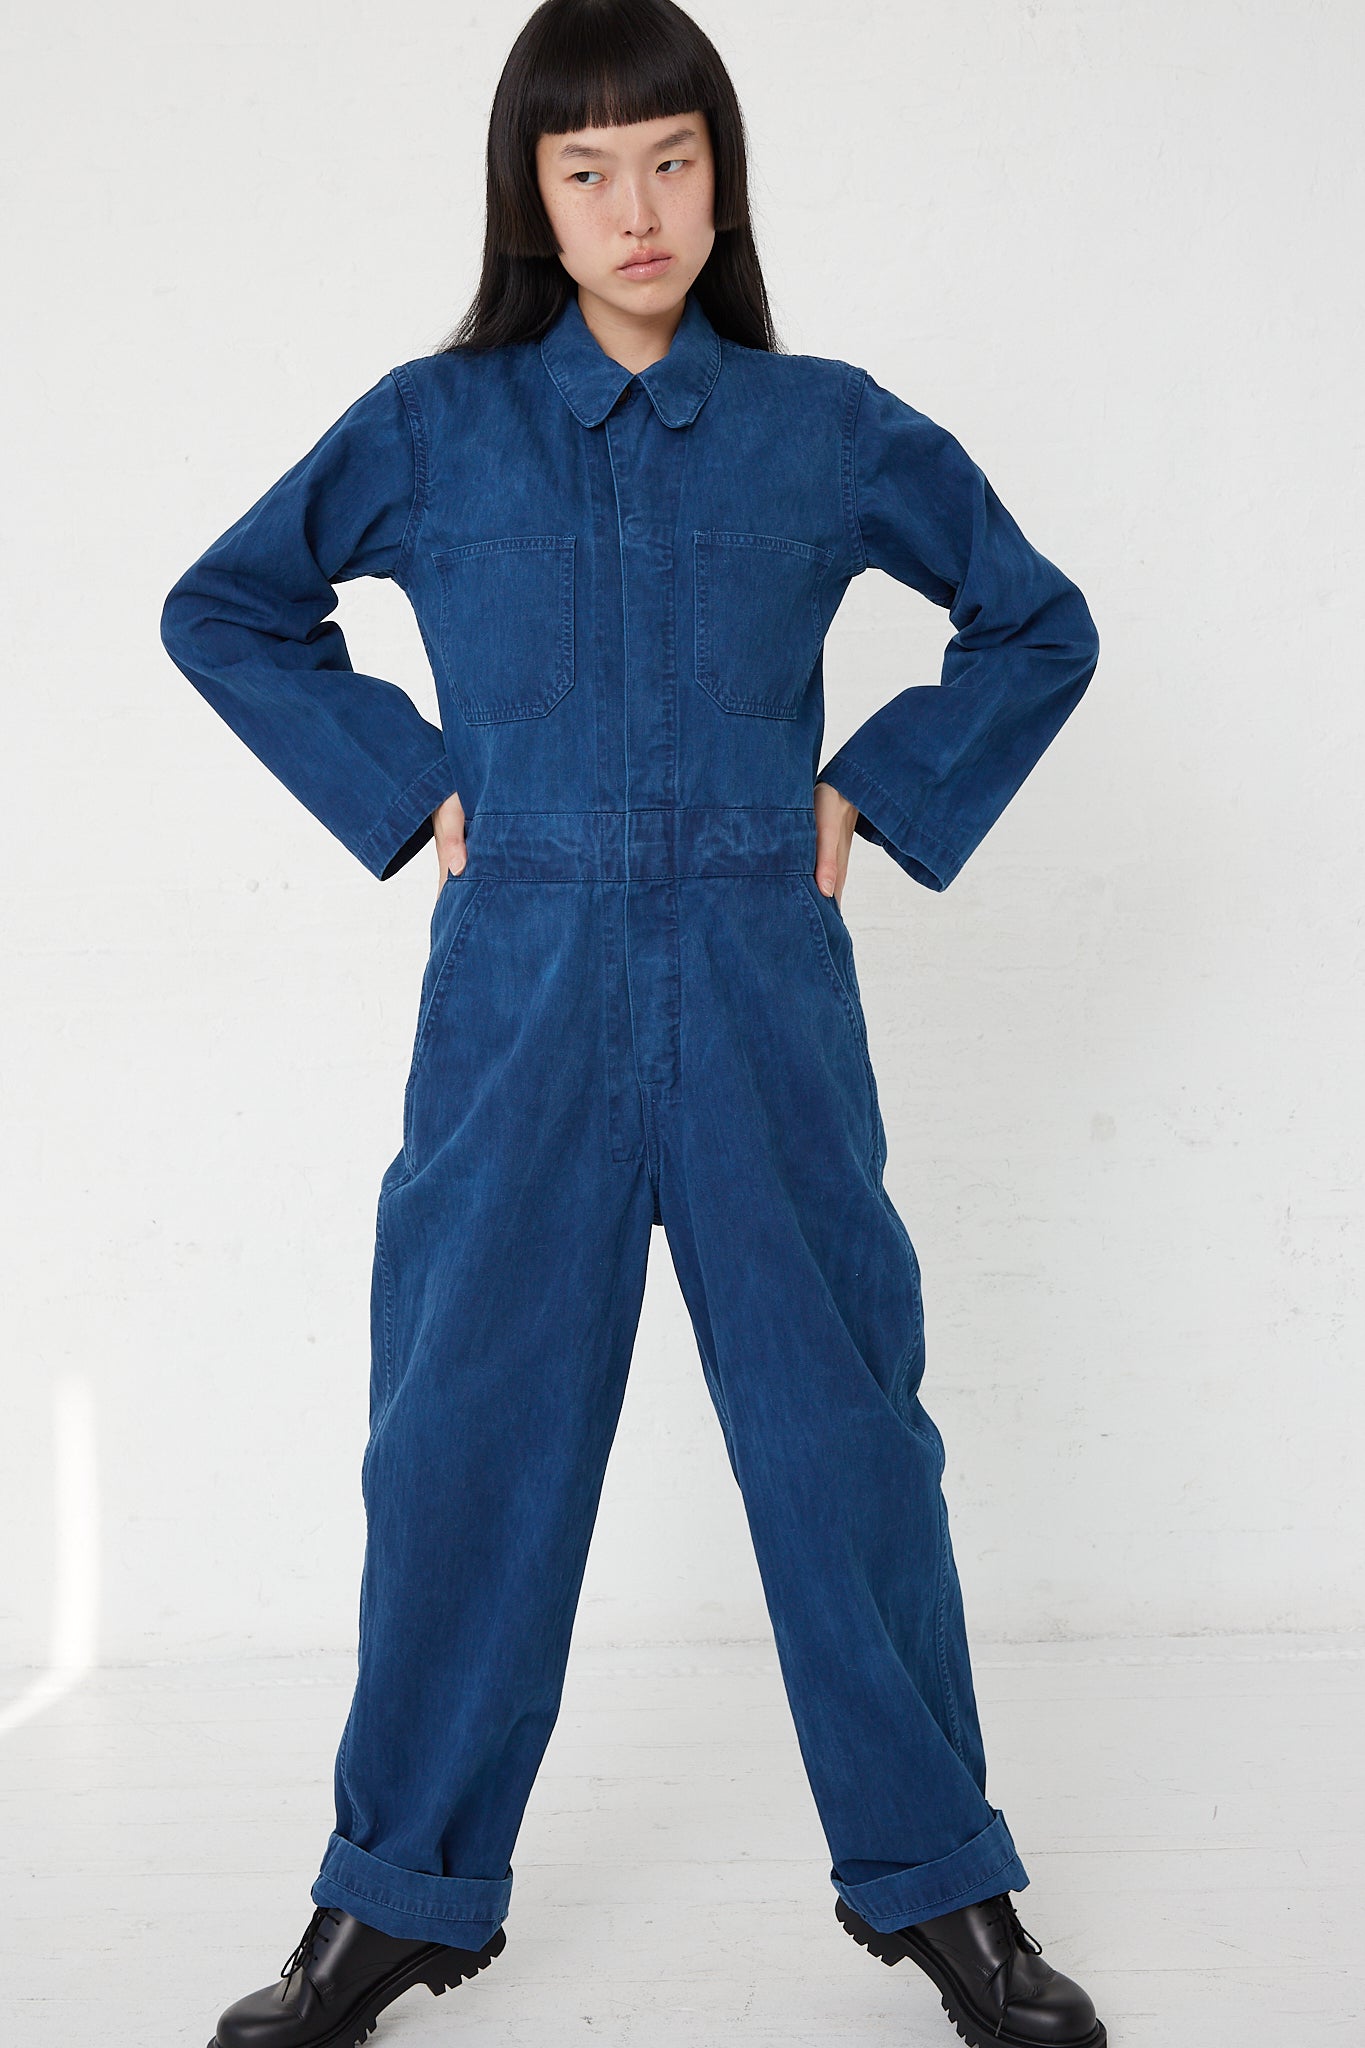 A woman in an As Ever front zip jumpsuit in Indigo posing for a photo.